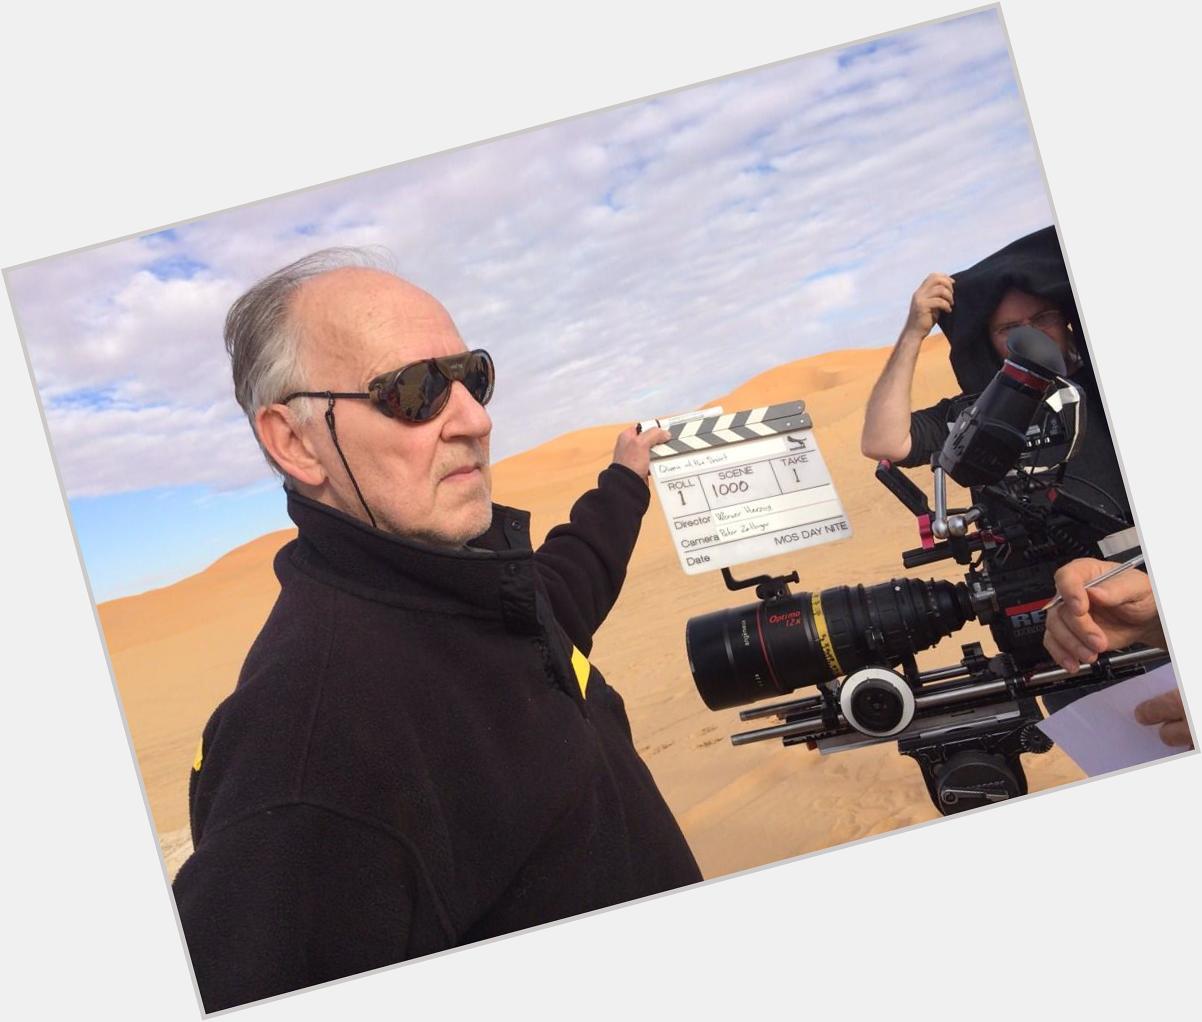 HAPPY BIRTHDAY to incomparable director Werner Herzog! Hope you have an amazing day! 